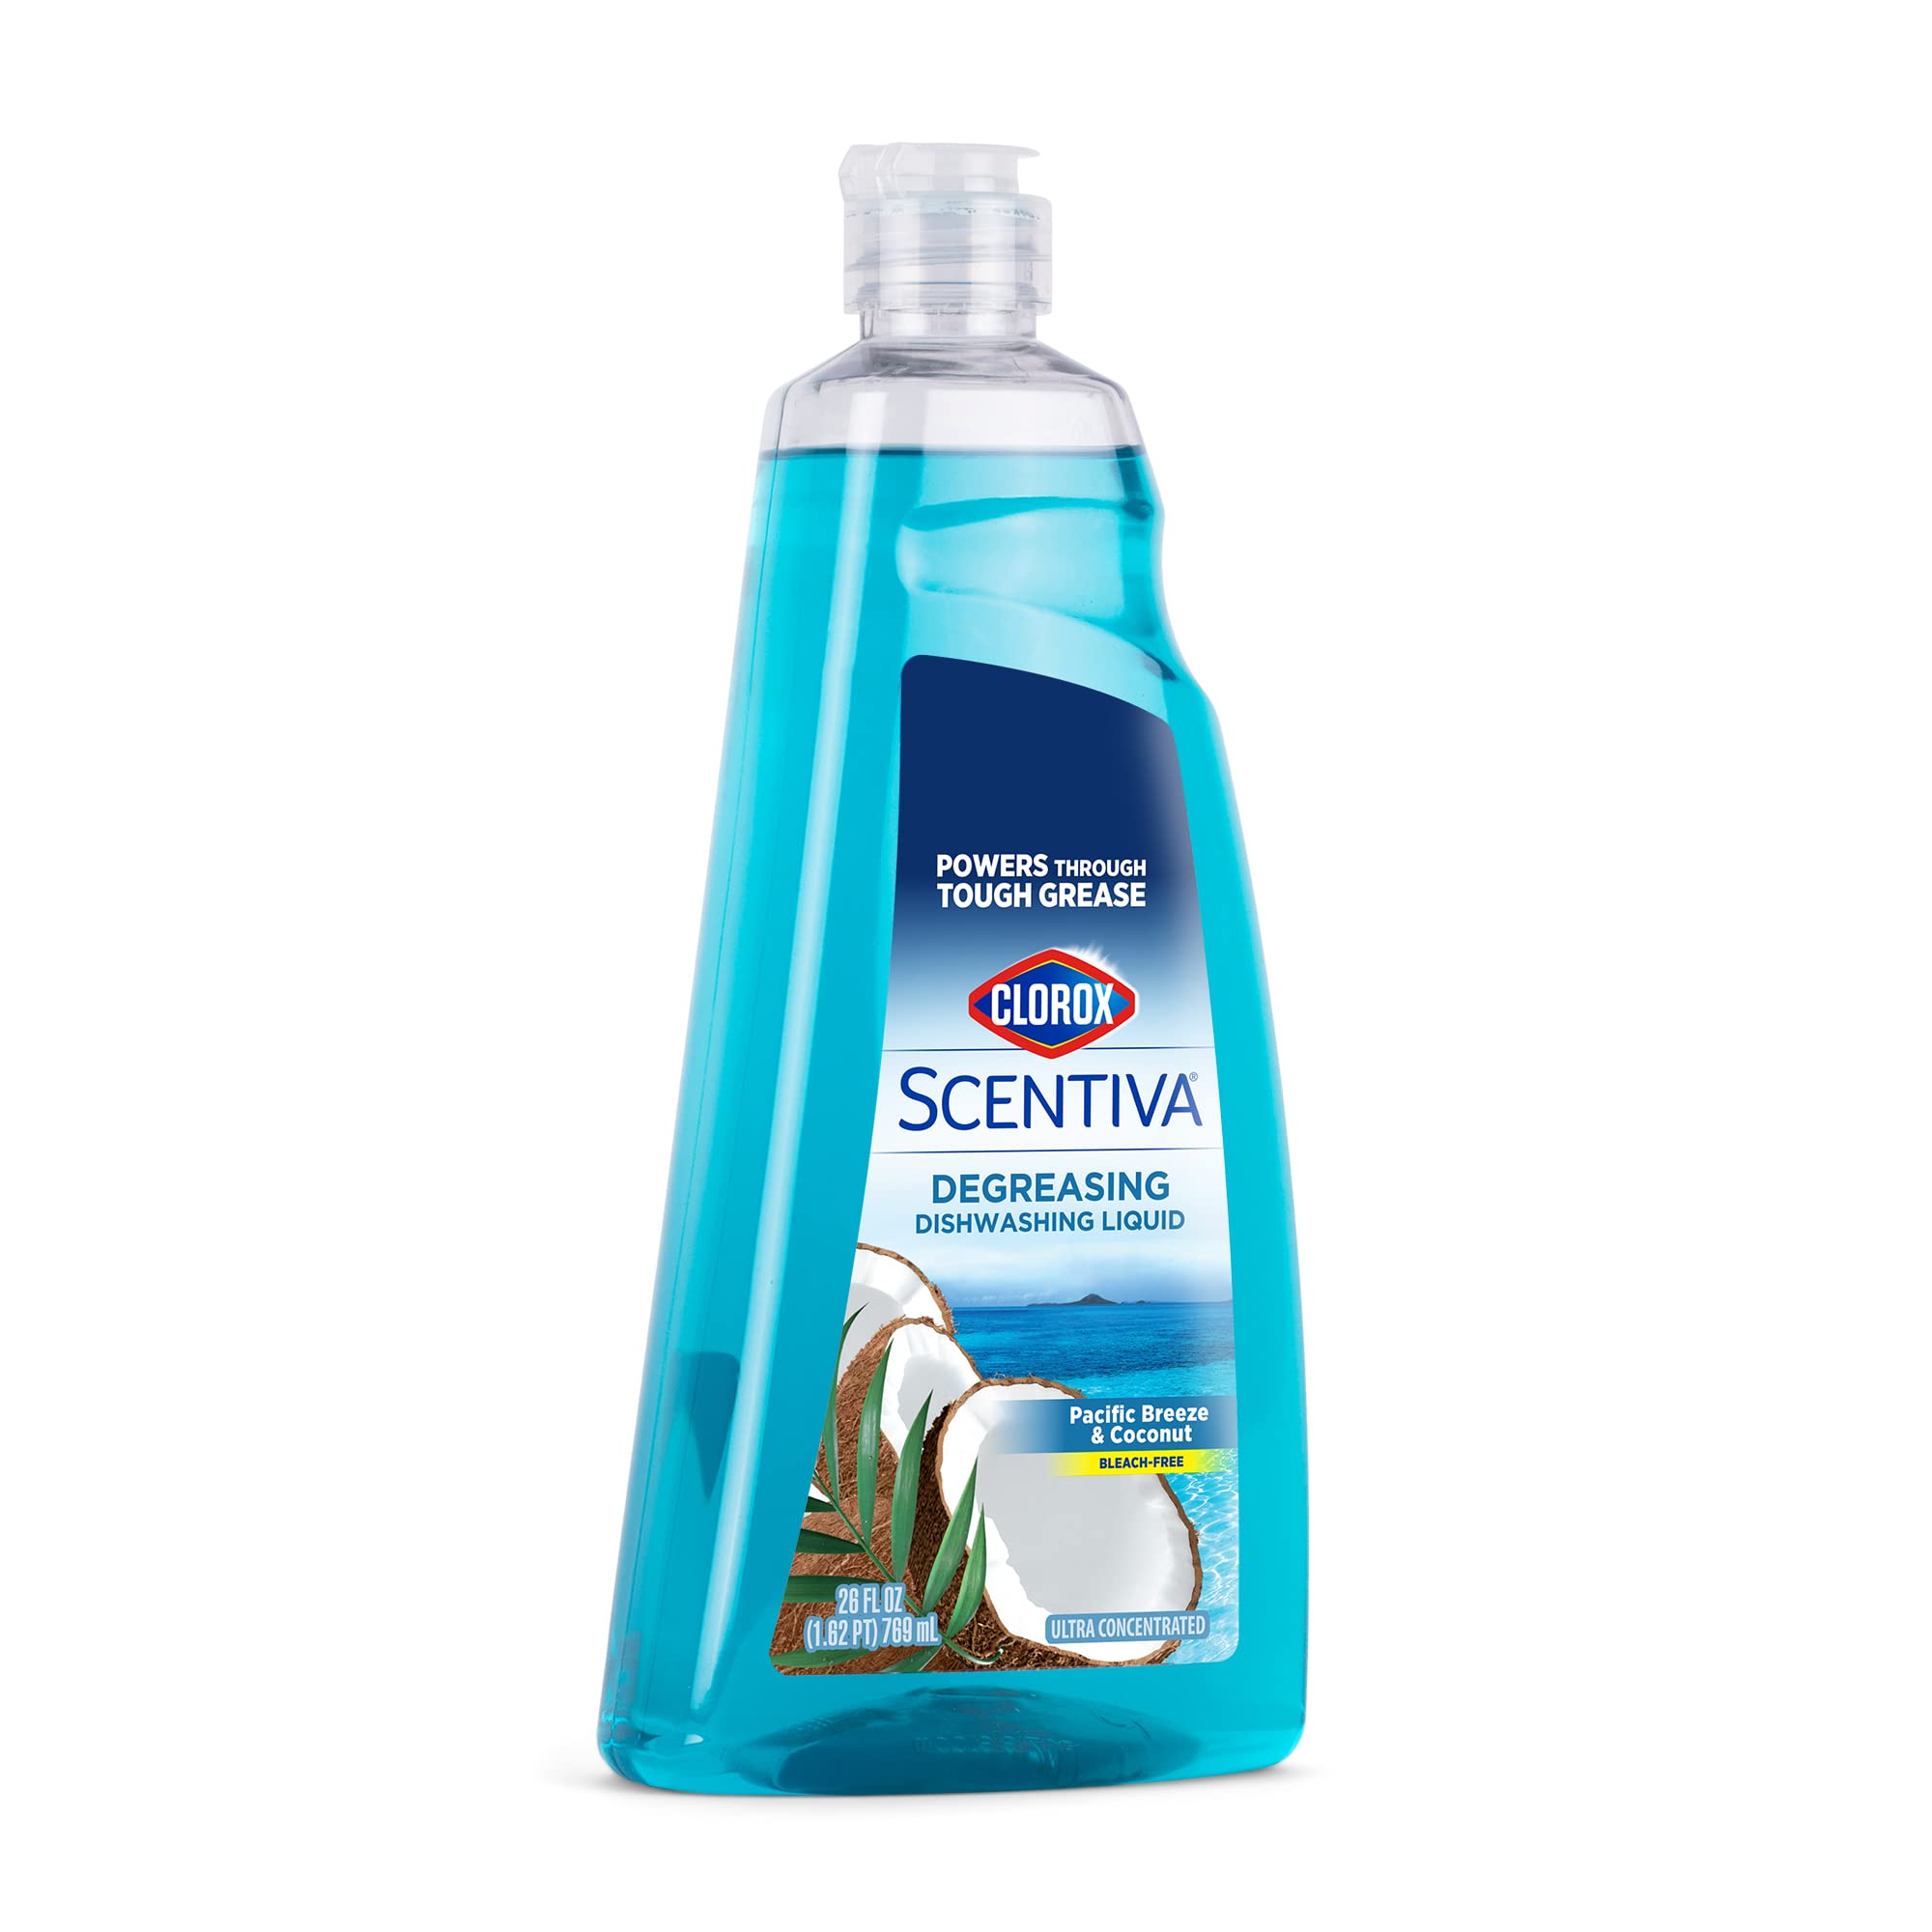 Clorox Scentiva Dishwashing Liquid Soap | Smells Great and Cuts Through Grease FAST | Quick Rinsing Formula Washes Away Germs | A Powerful Clean You Can Trust, Pacific Breeze & Coconut, 26 Oz